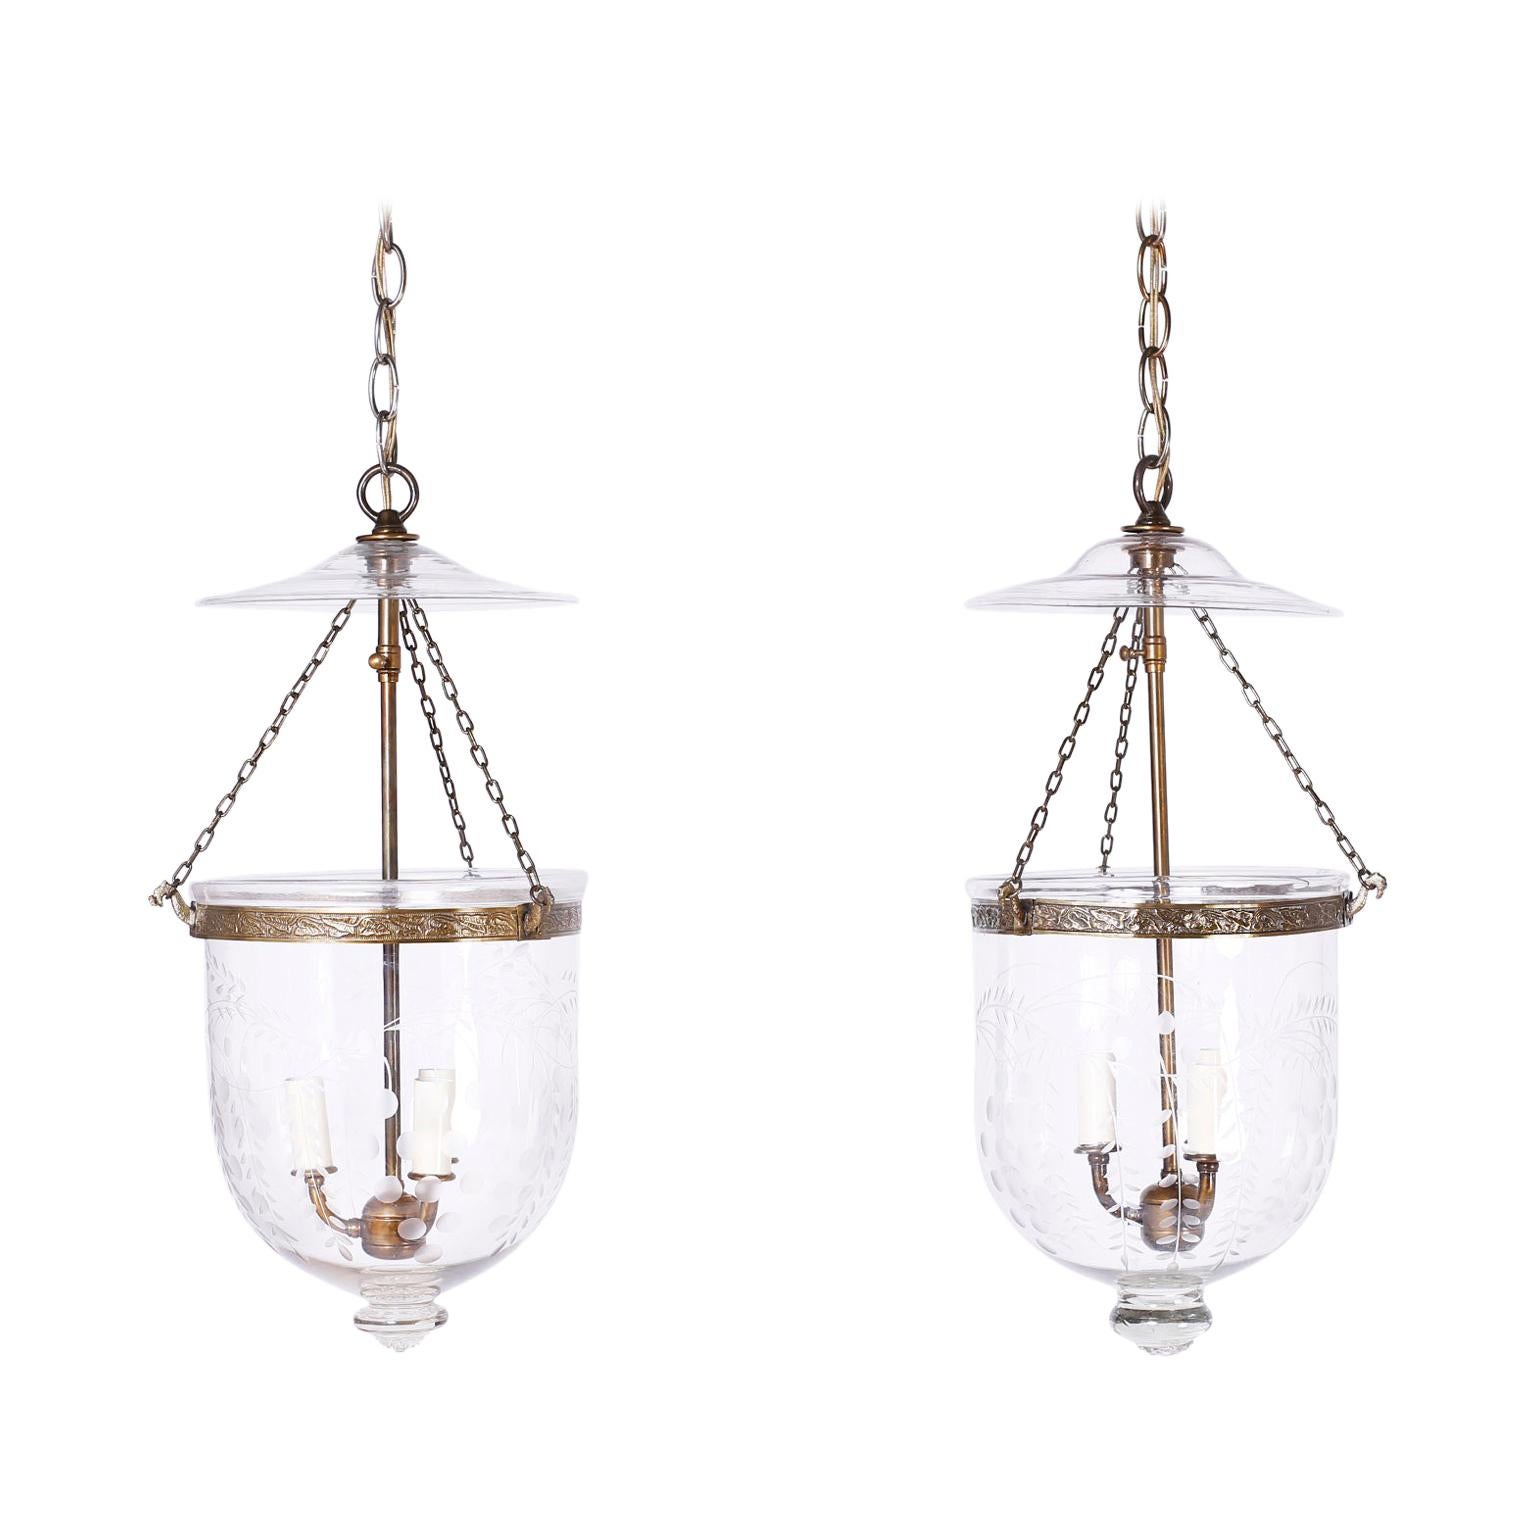 Pair of Smoke Bell Light Fixtures, Priced Individually